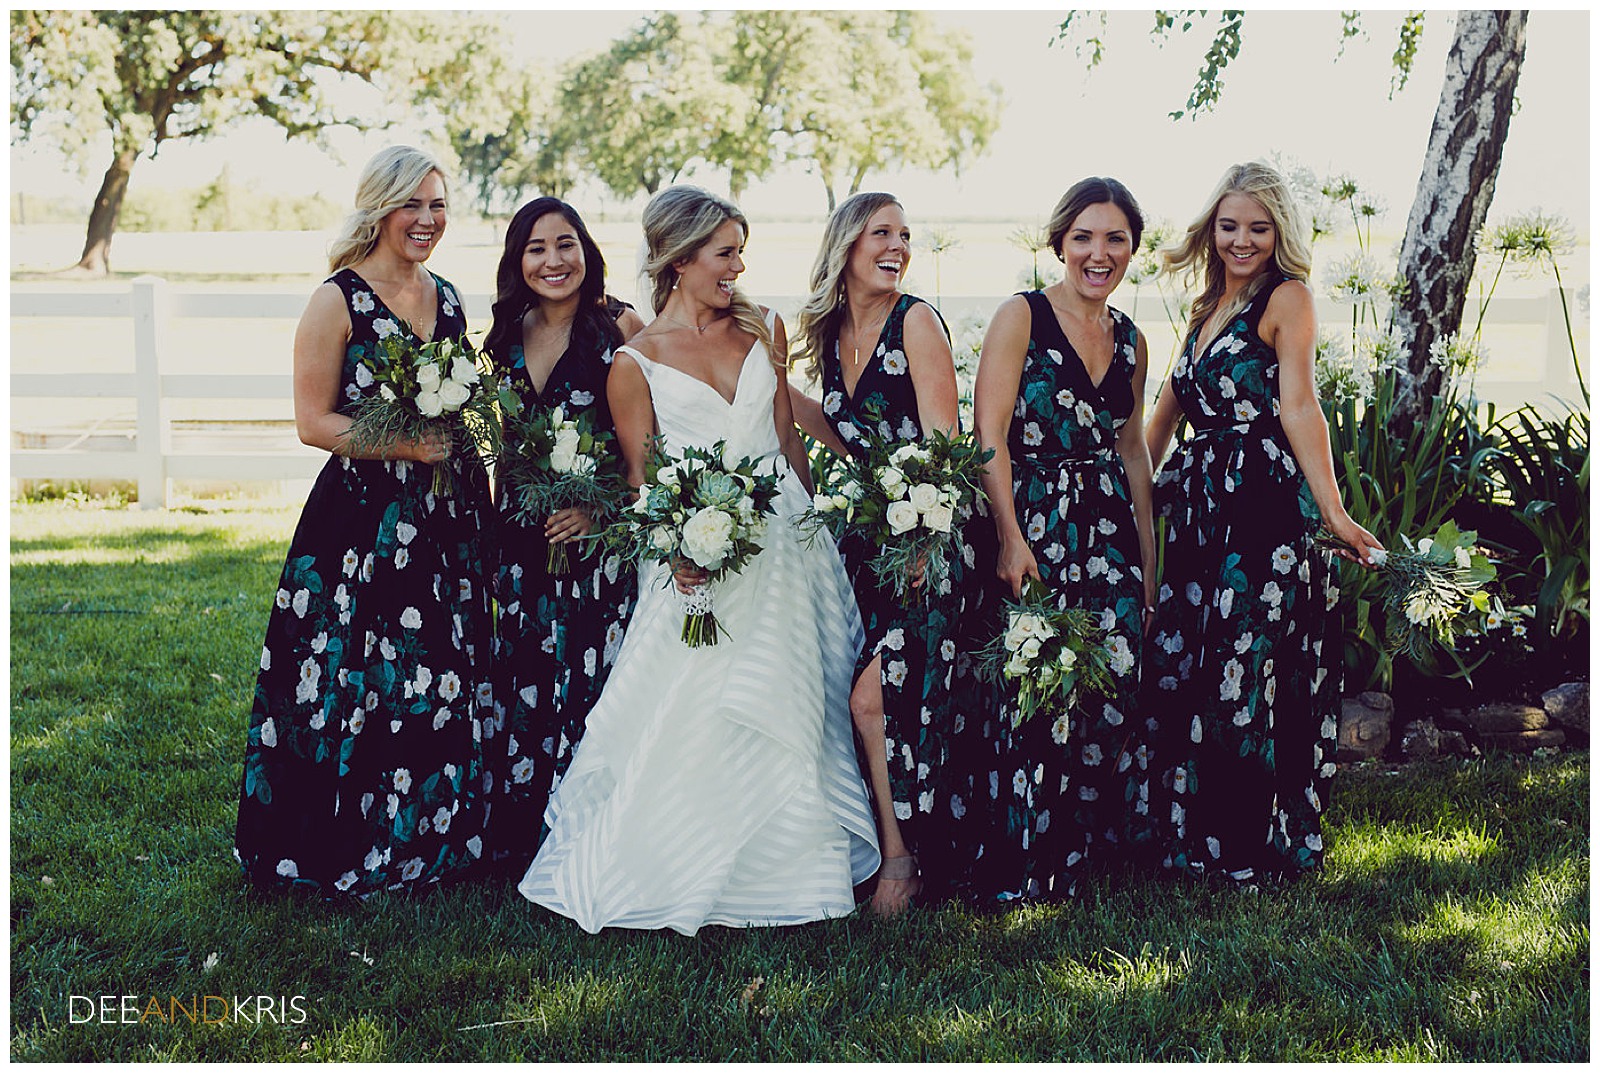 Floral Bridesmaid's dresses for an outdoor wedding